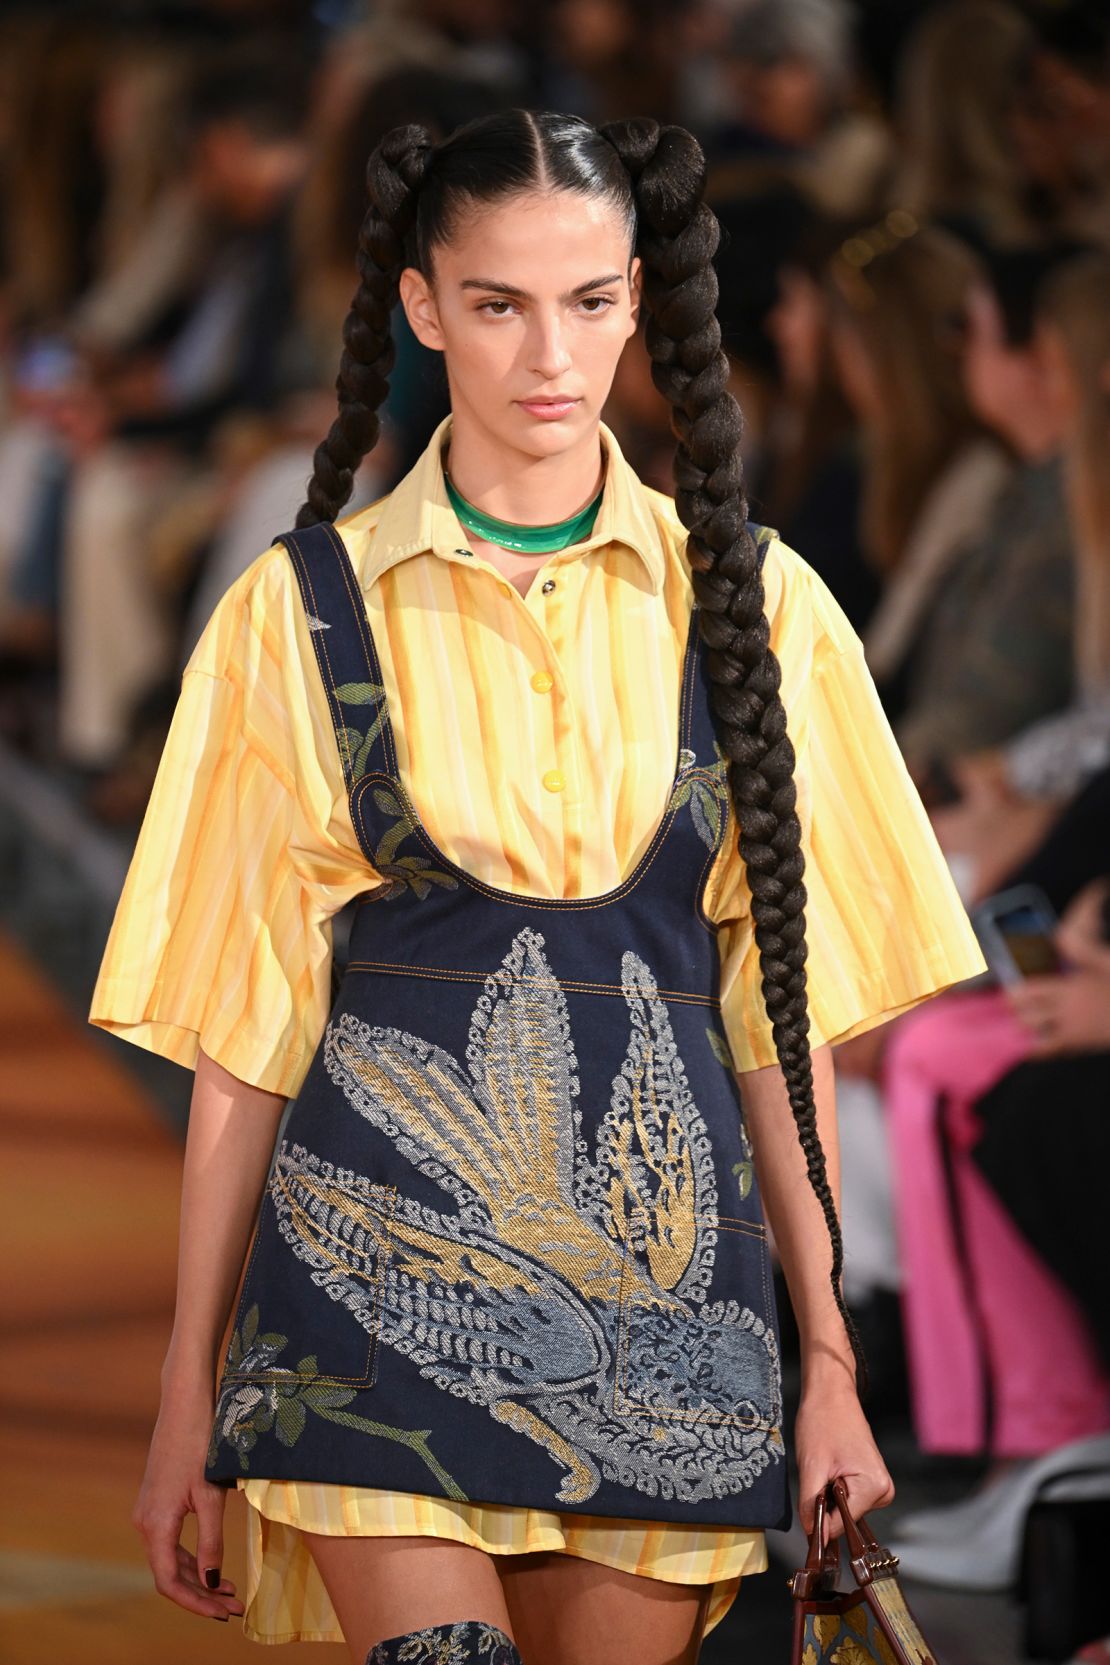 Marco De Vincenzo debut show for Etro as the brand's new creative director.